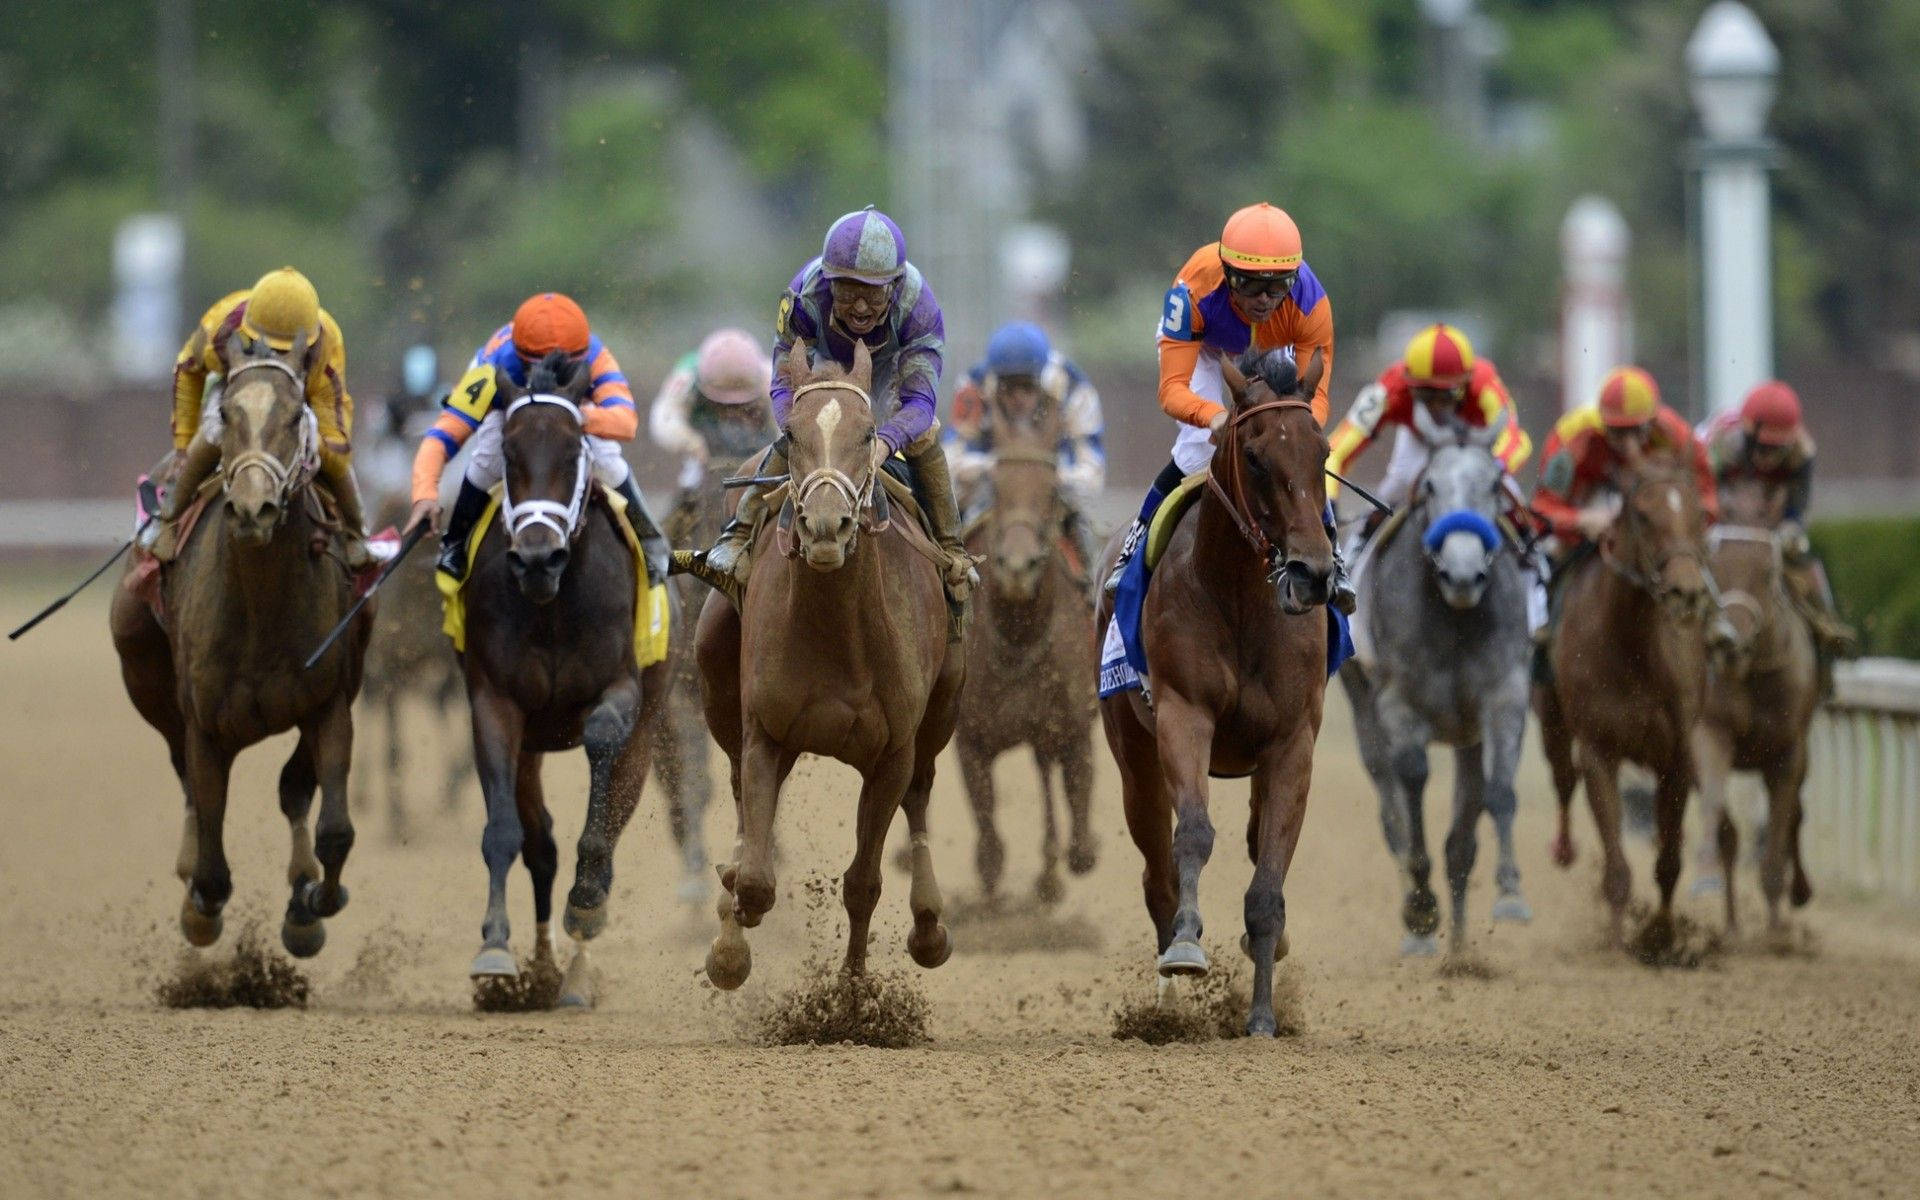 Competitive Horses Aligned For The Spectacular Race Background